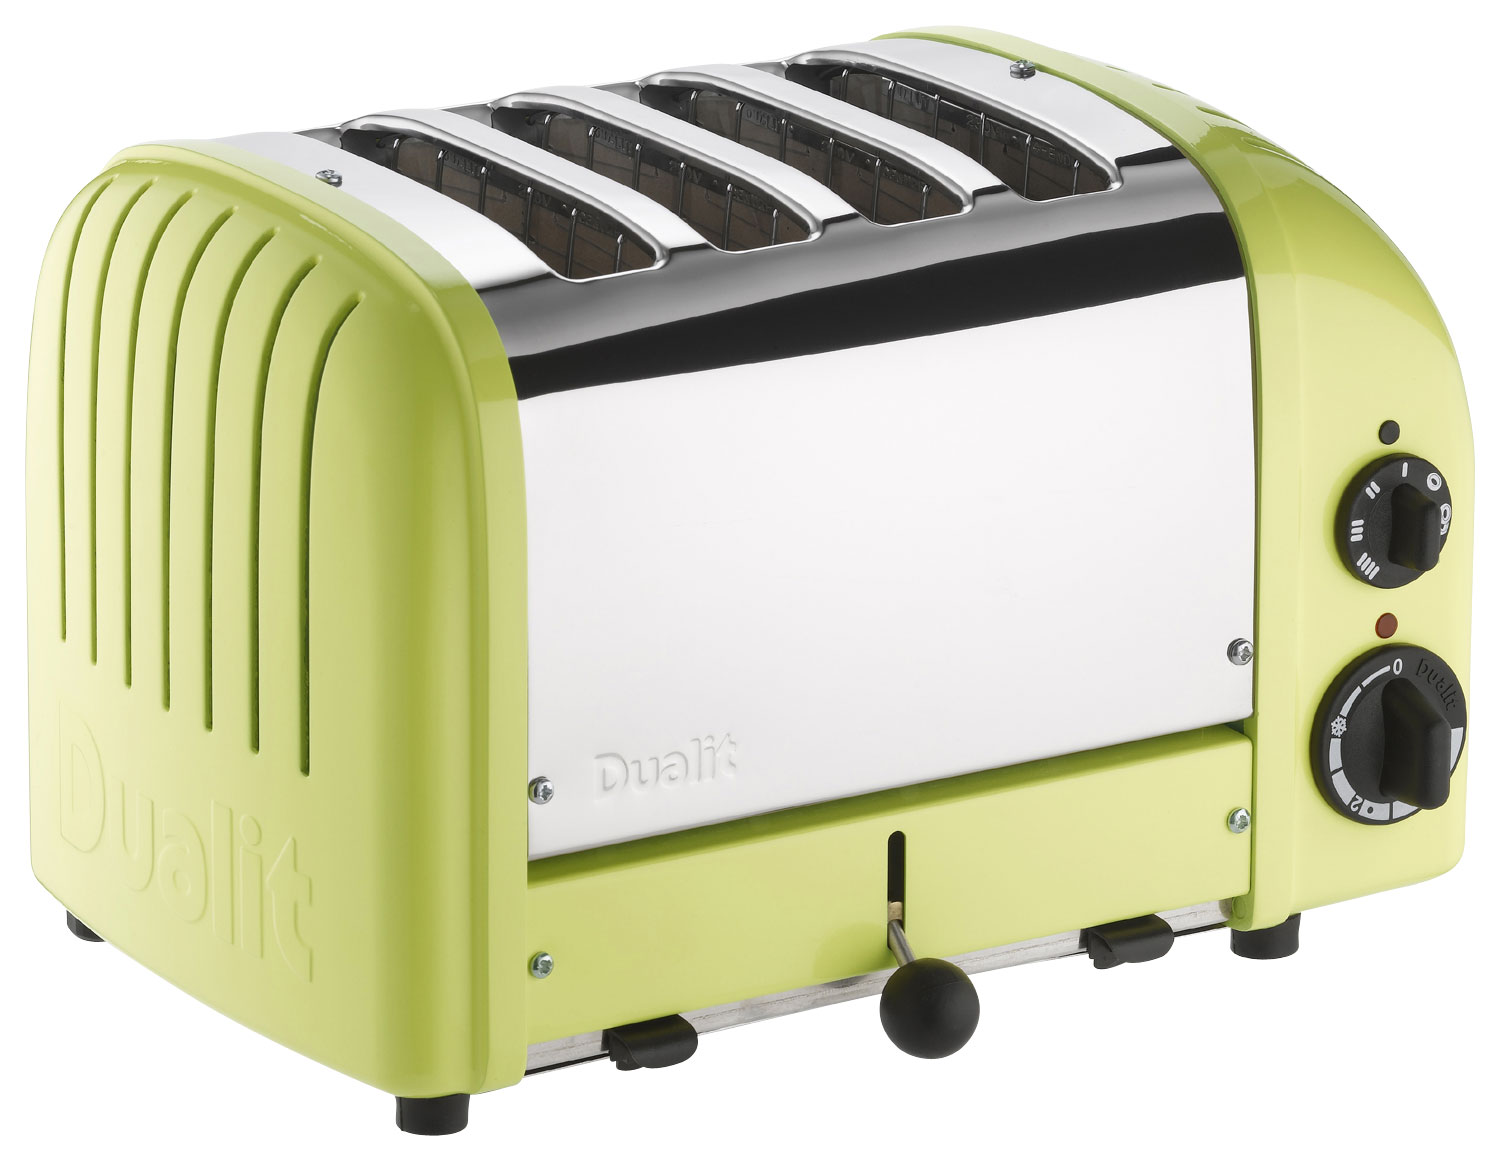 Dash Mini Toaster Oven - Green curated on LTK